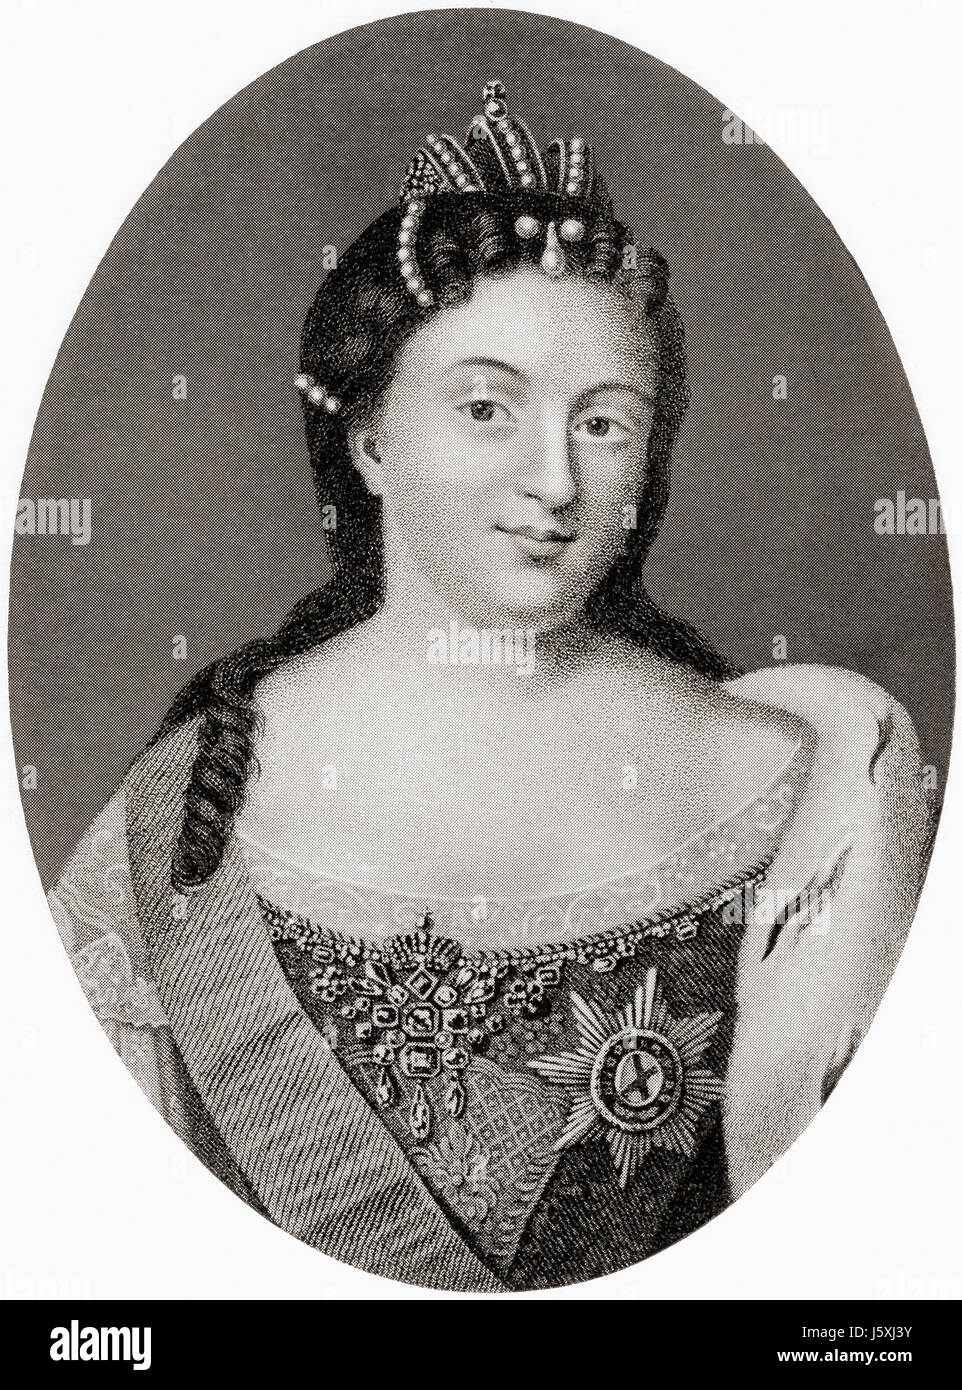 Anna Ioannovna, 1693 – 1740, also spelled Anna Ivanovna.  Regent of the duchy of Courland, 1711 - 1730 and then Empress of Russia, 1730 to 1740. From Hutchinson's History of the Nations, published 1915. Stock Photo